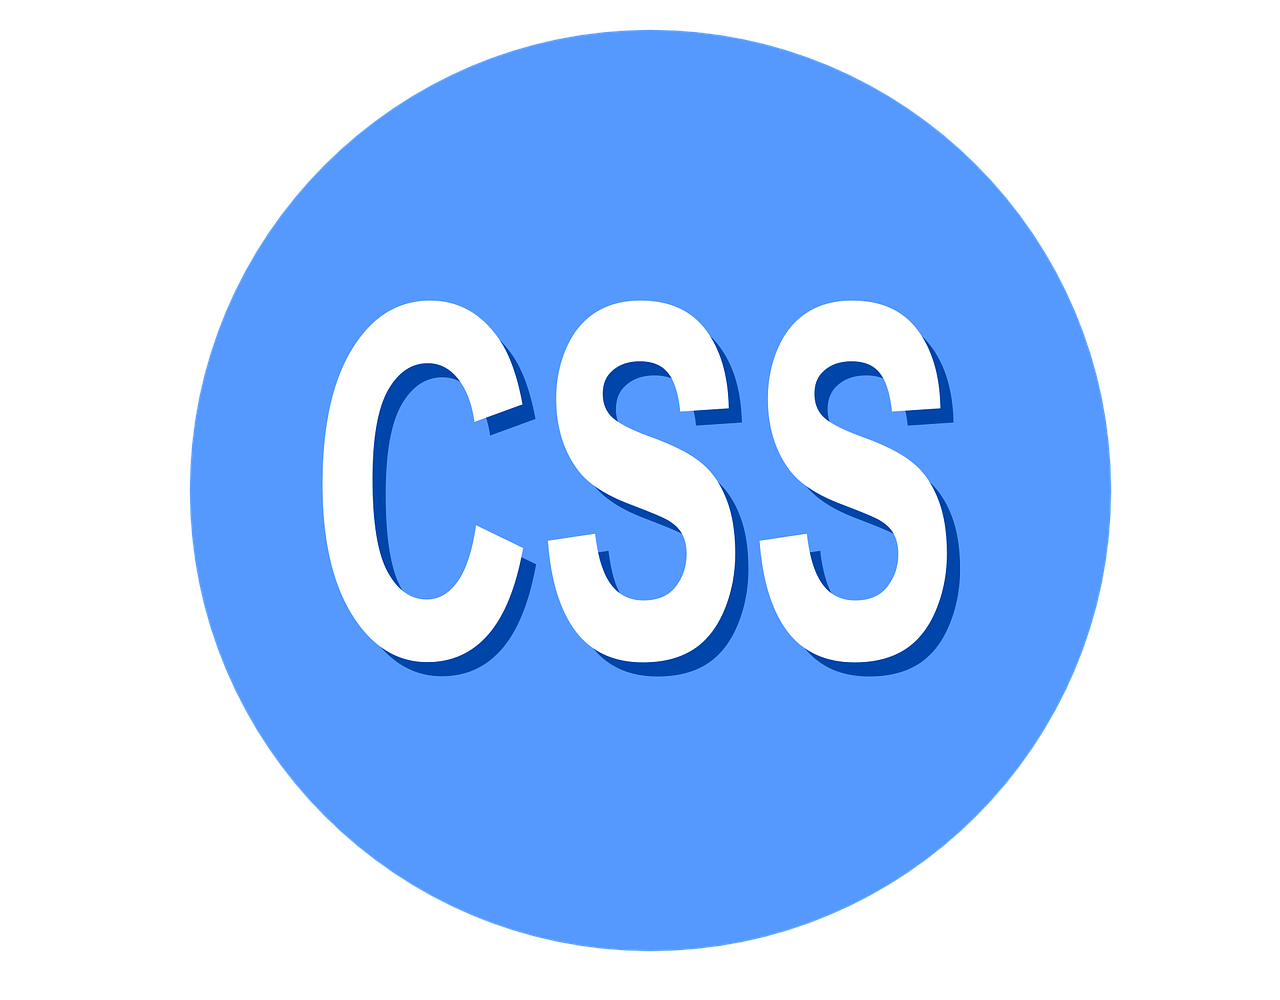 Learn the basic details of CSS here